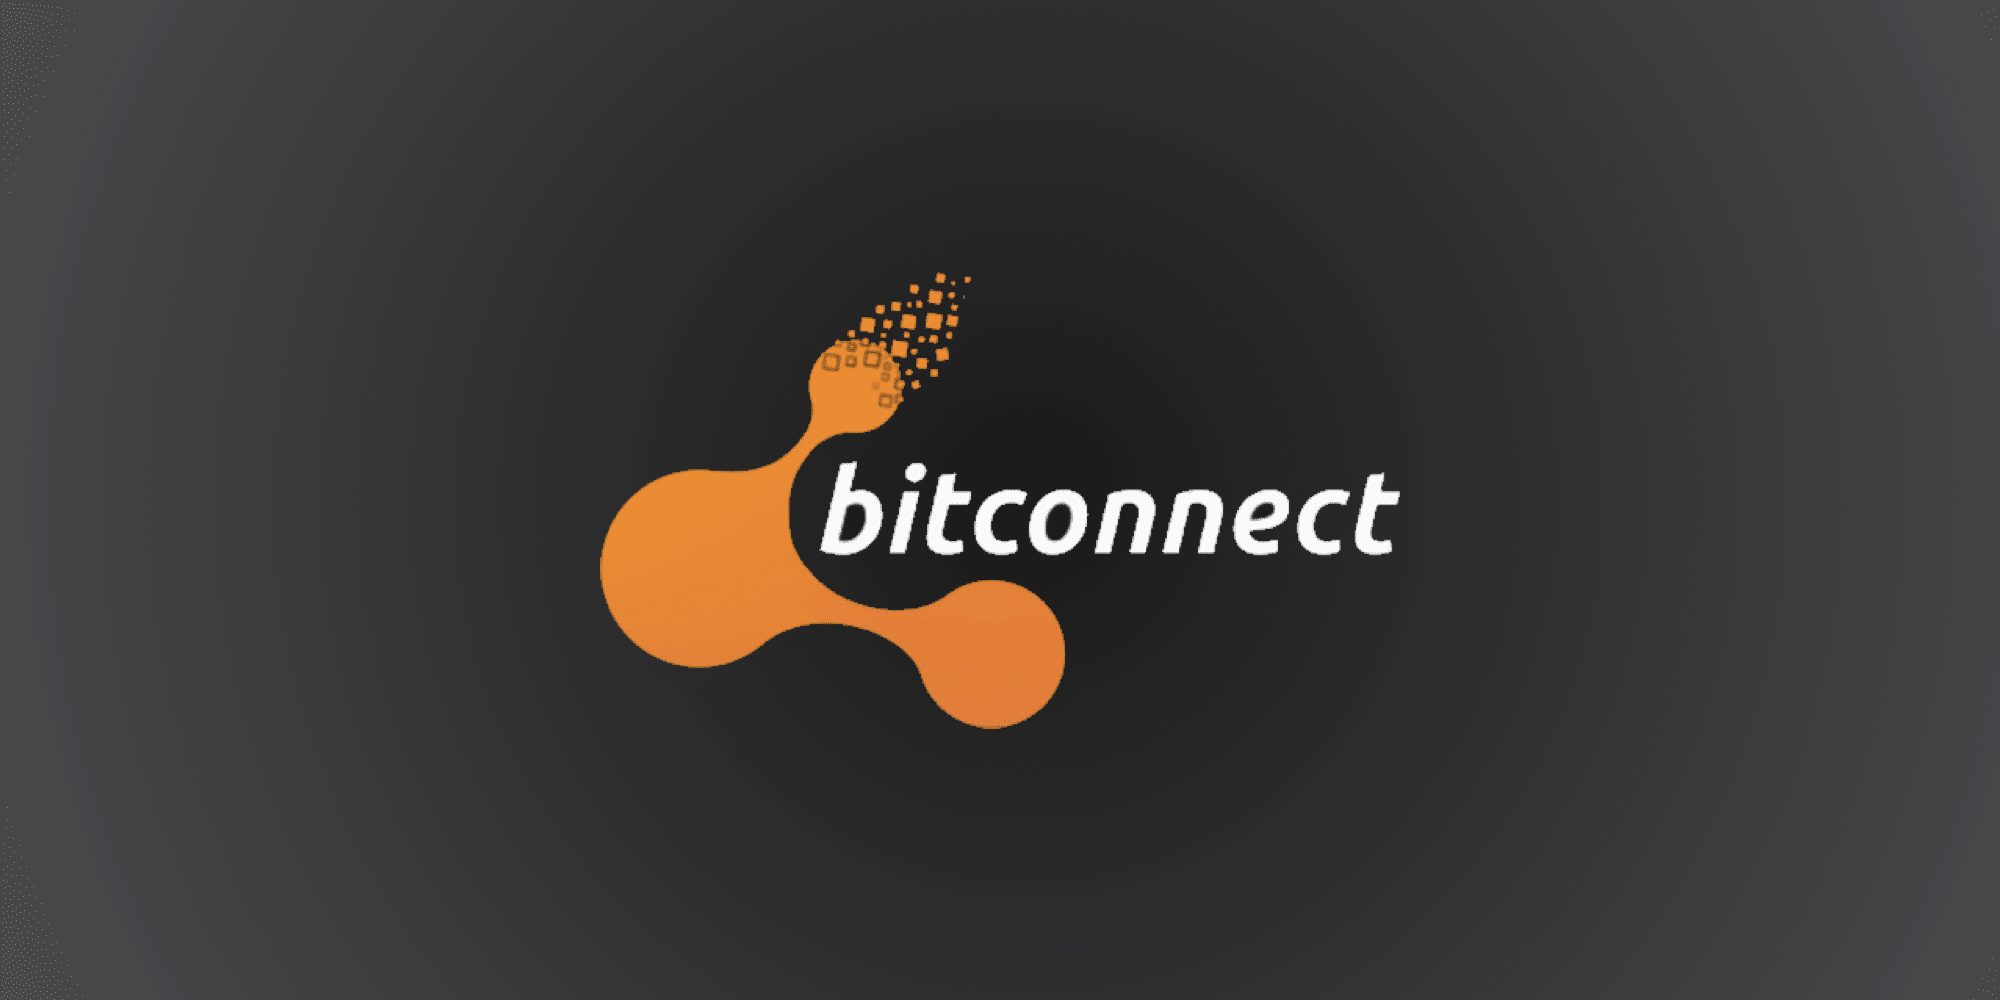 BitConnect founder charged with orchestrating $2 billion Ponzi scheme | CNN Business